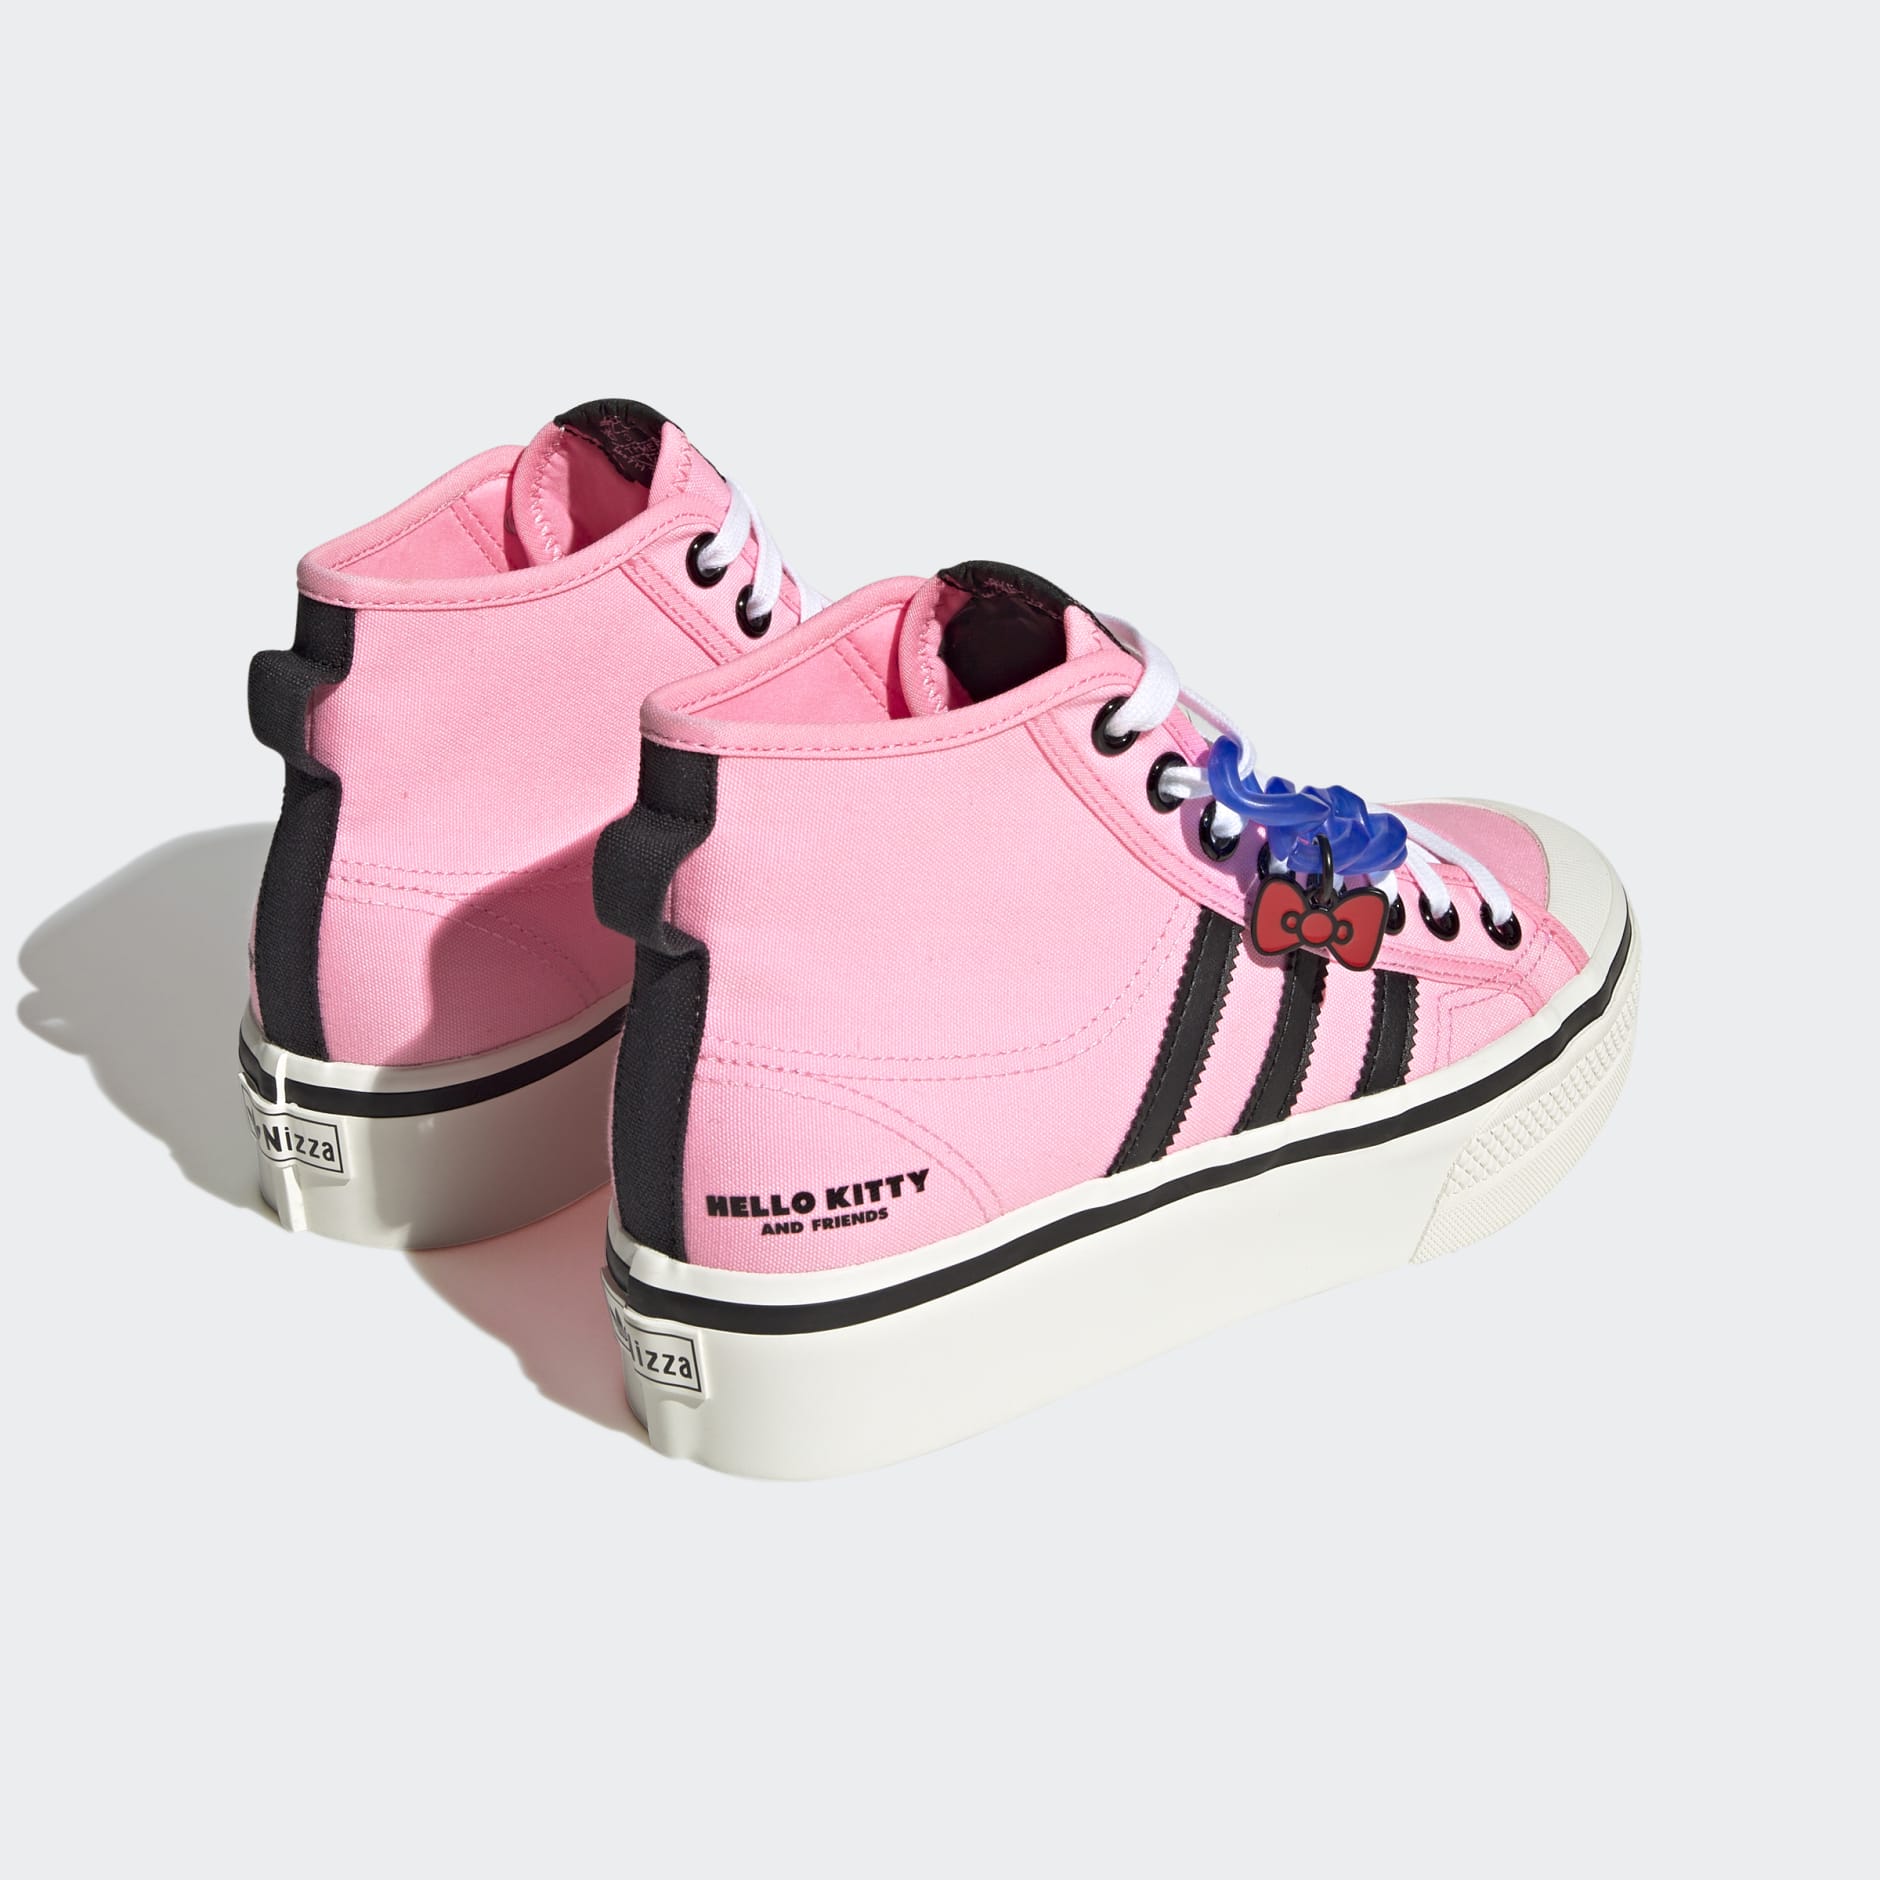 Shoes - Nizza Platform Mid Shoes - Pink | adidas South Africa